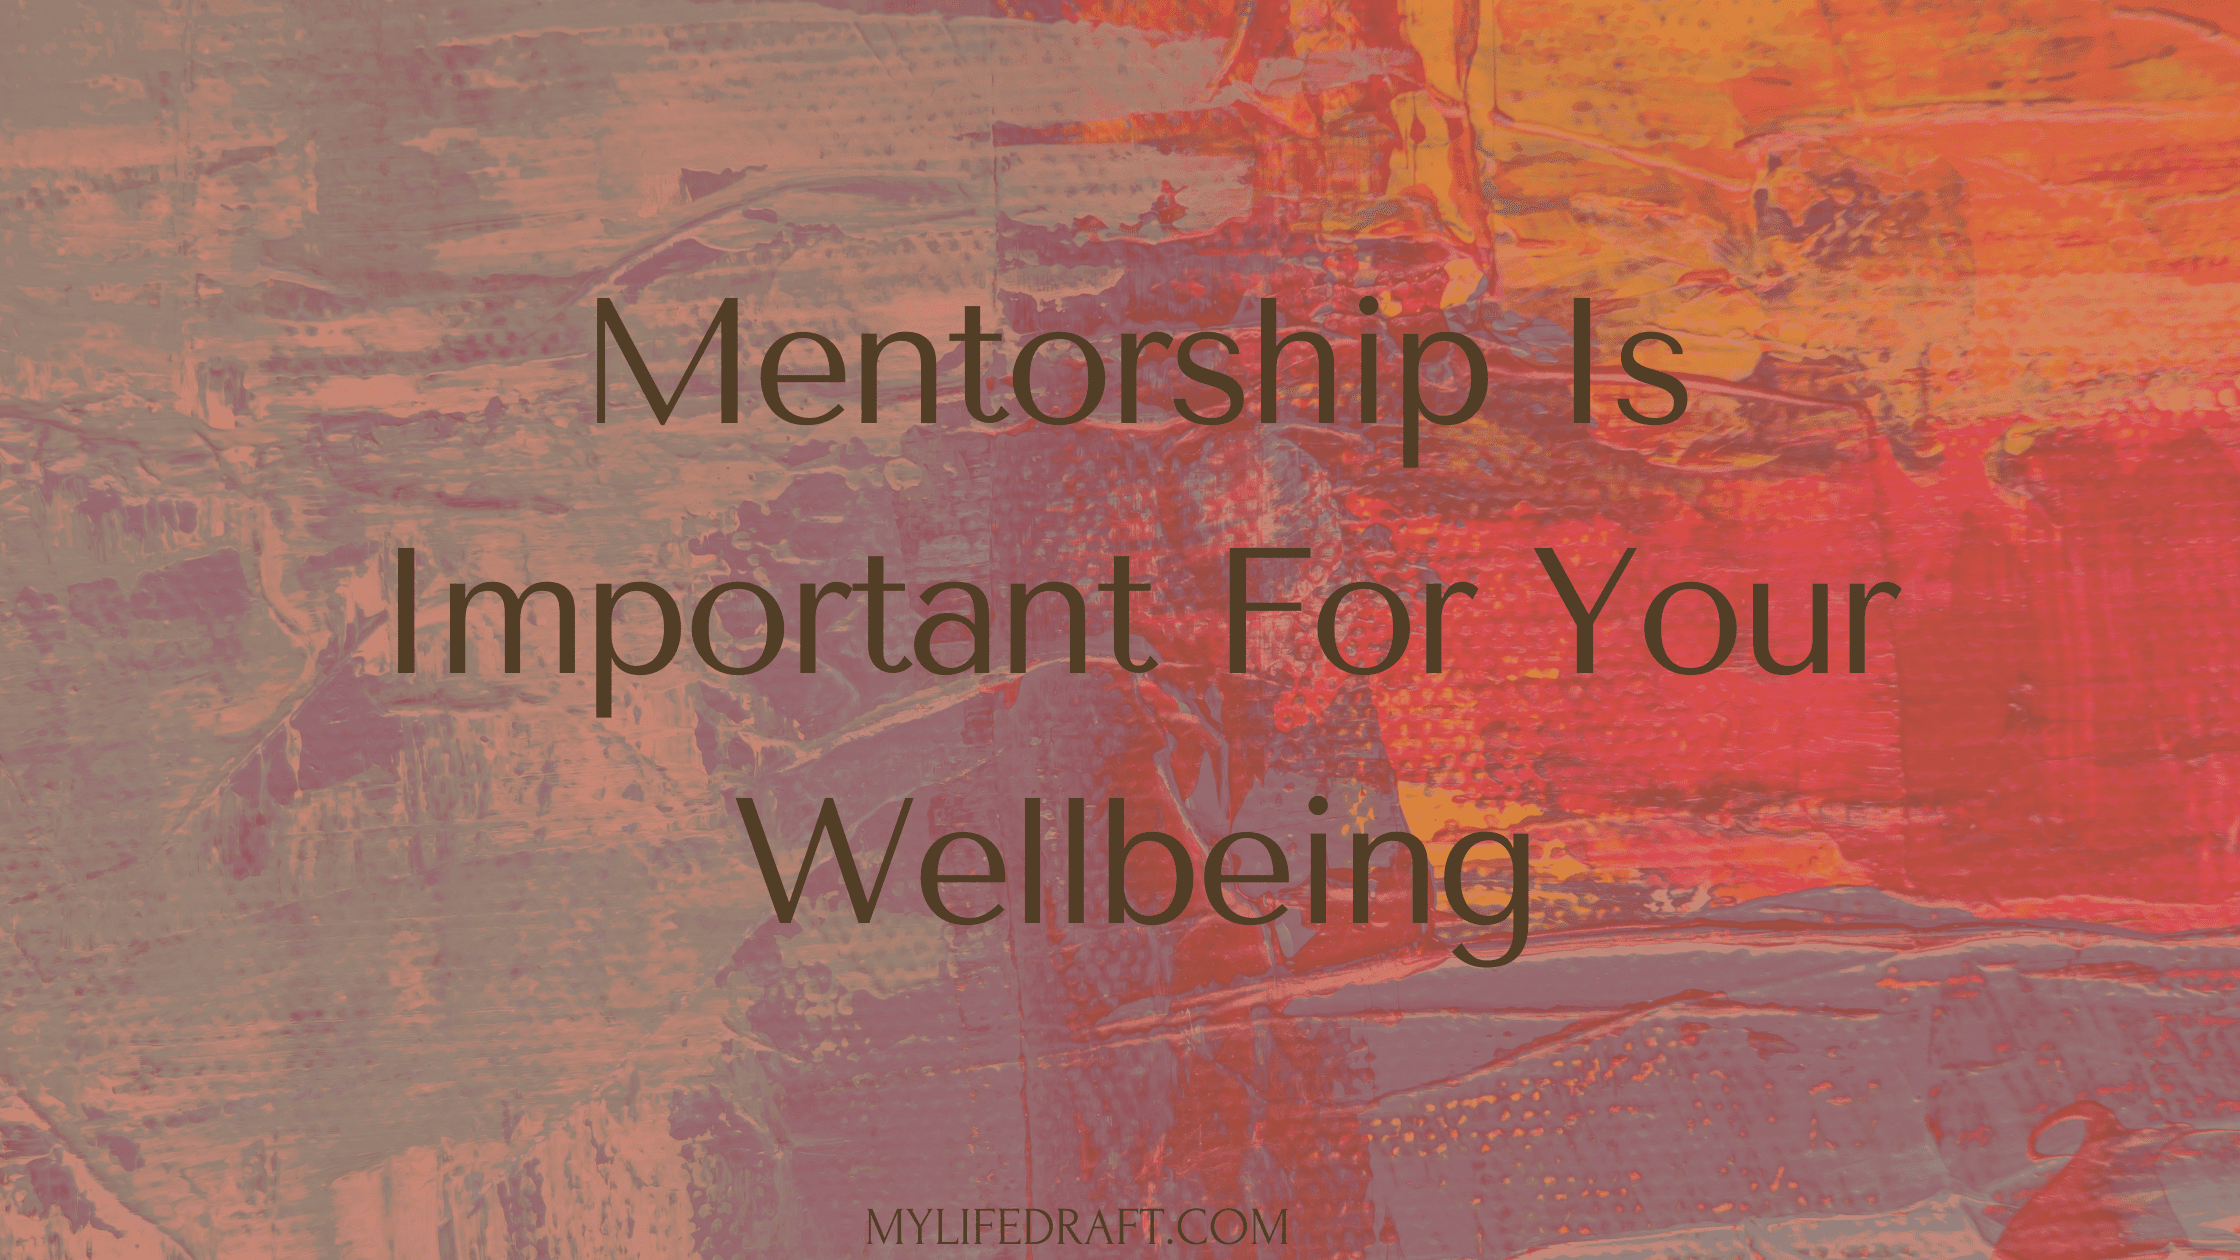 Why Mentorship Is Important For Your Wellbeing